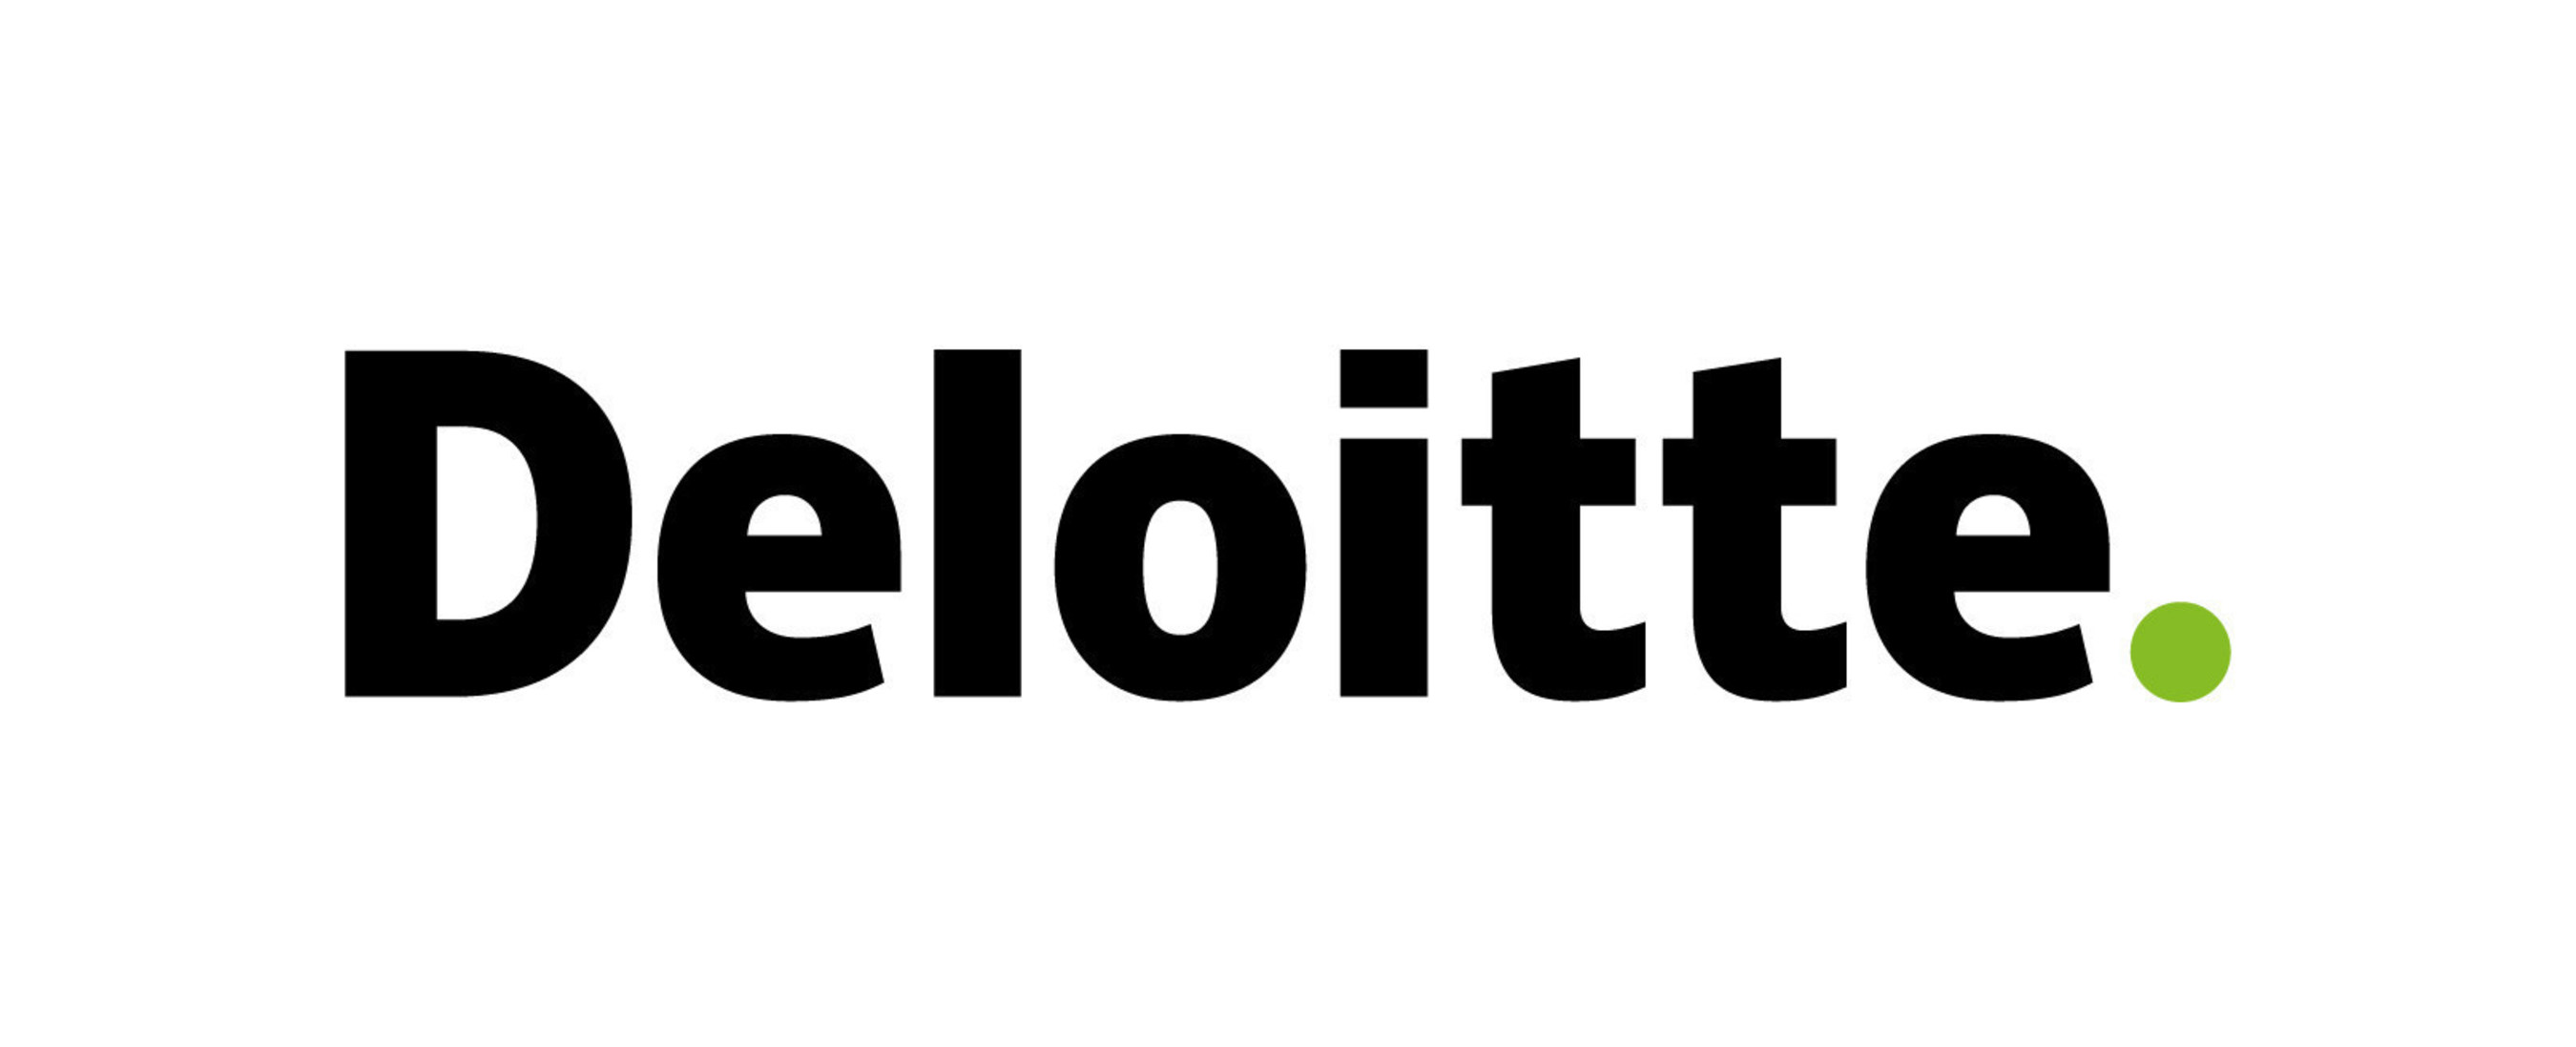 As used in this document, "Deloitte" means Deloitte LLP. Please see  www.deloitte.com/us/about for a detailed description of the legal structure of Deloitte LLP and its subsidiaries. Certain services may not be available to attest clients under the rules and regulations of public accounting. (PRNewsFoto/Deloitte) (PRNewsFoto/Deloitte)